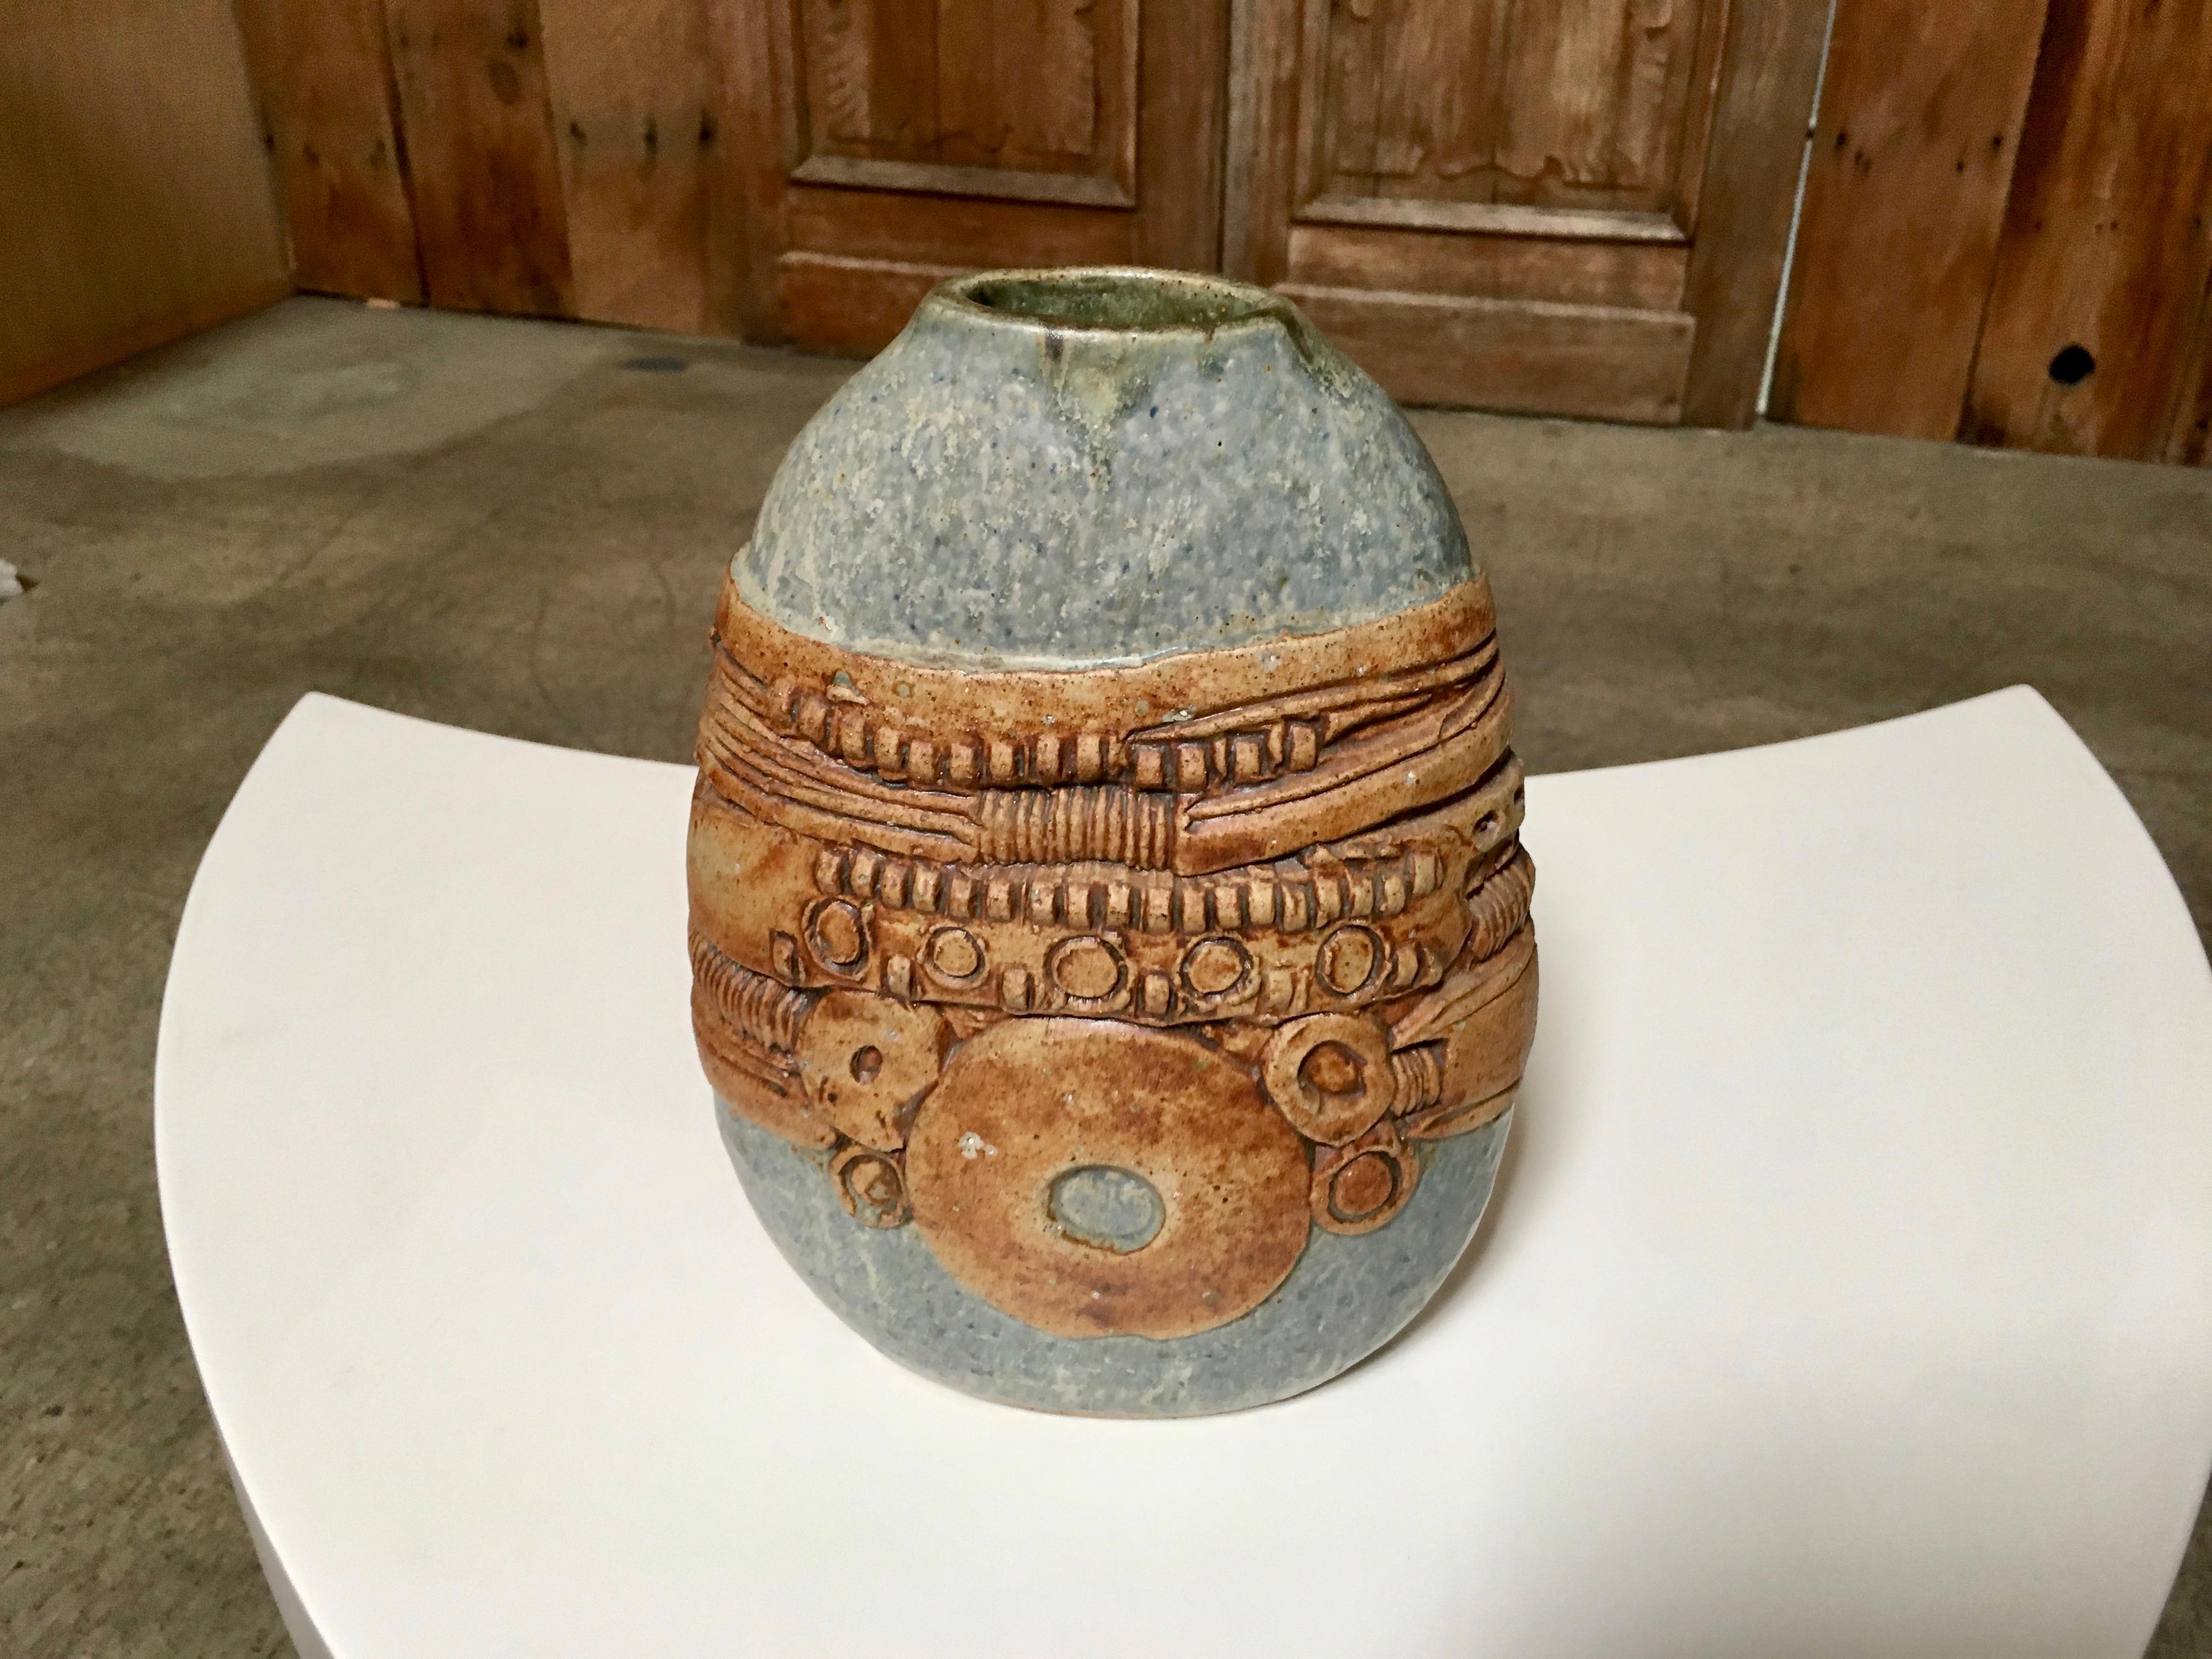 Vintage stoneware

In 1960 he set up his own workshop in Forest Hill, London, Progressive designs were readily accepted in London at that time, and Rooke applied his efforts to making pieces of a sculptural nature. The early pieces were mainly